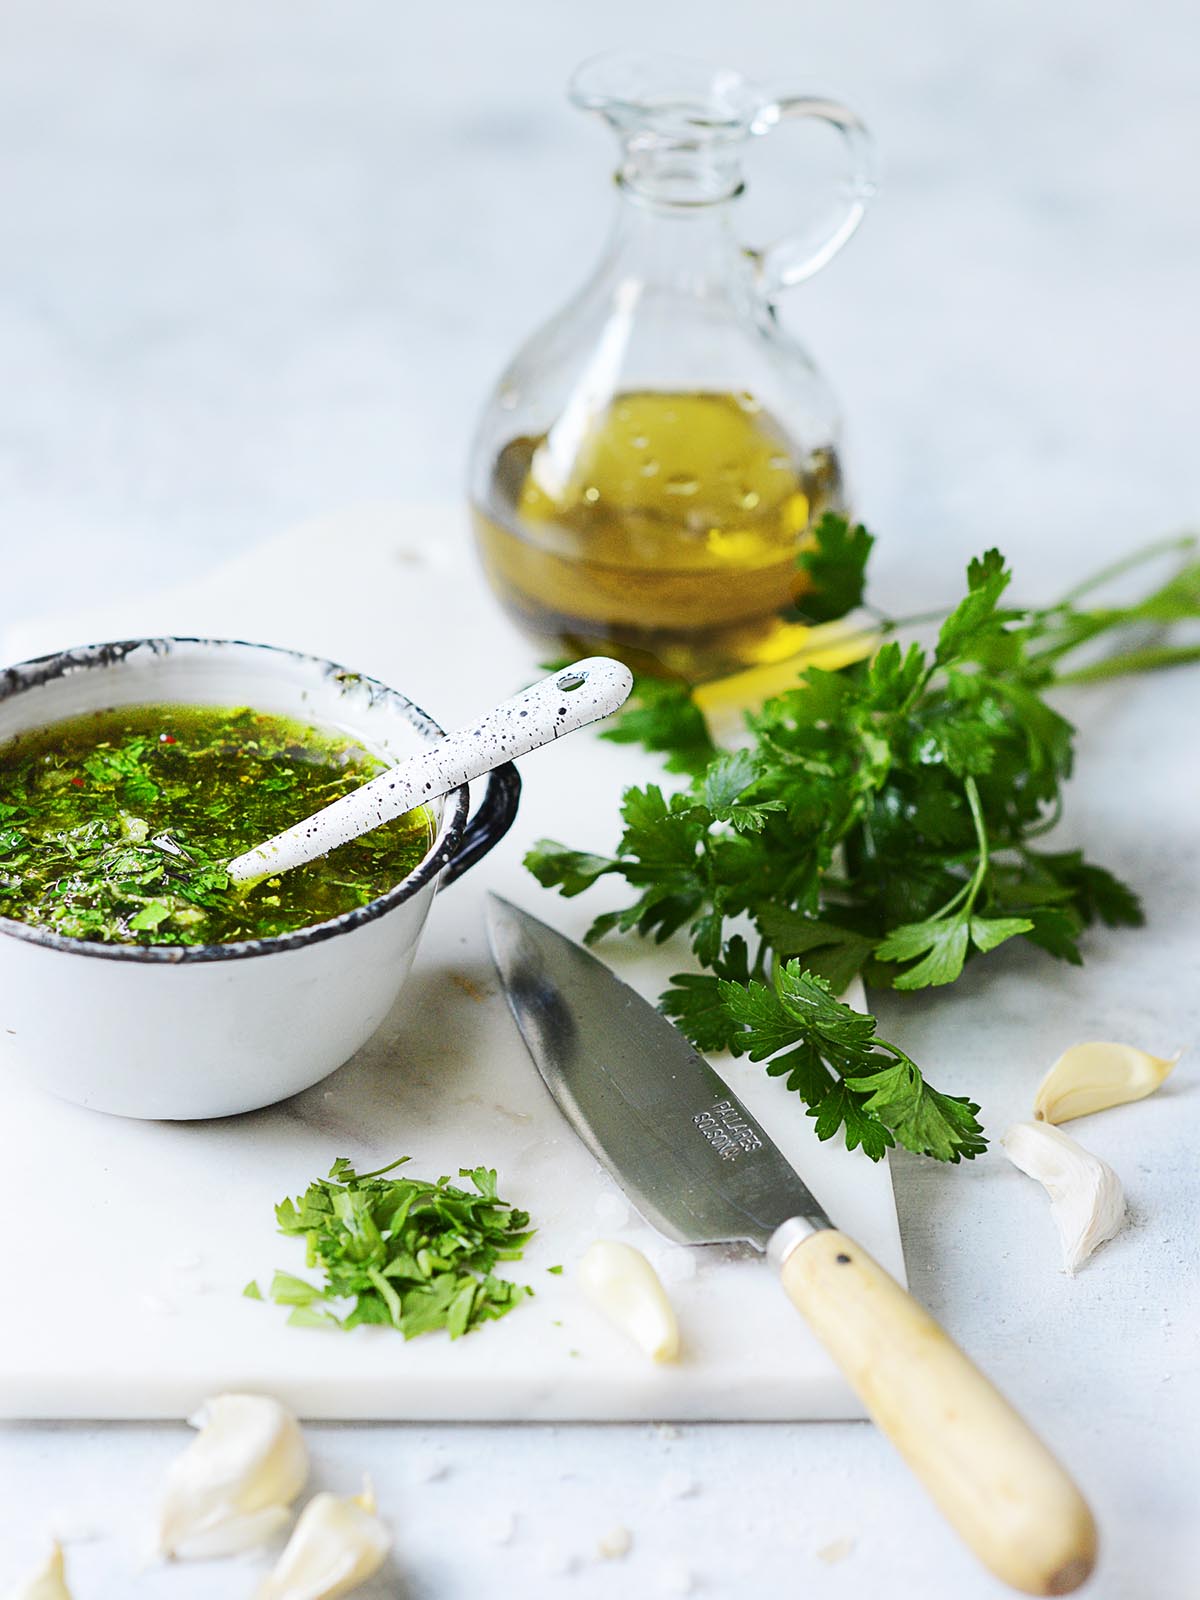 A white vintage cup with the green sauce, fresh parsley on the side and an olive oil jar in the background.